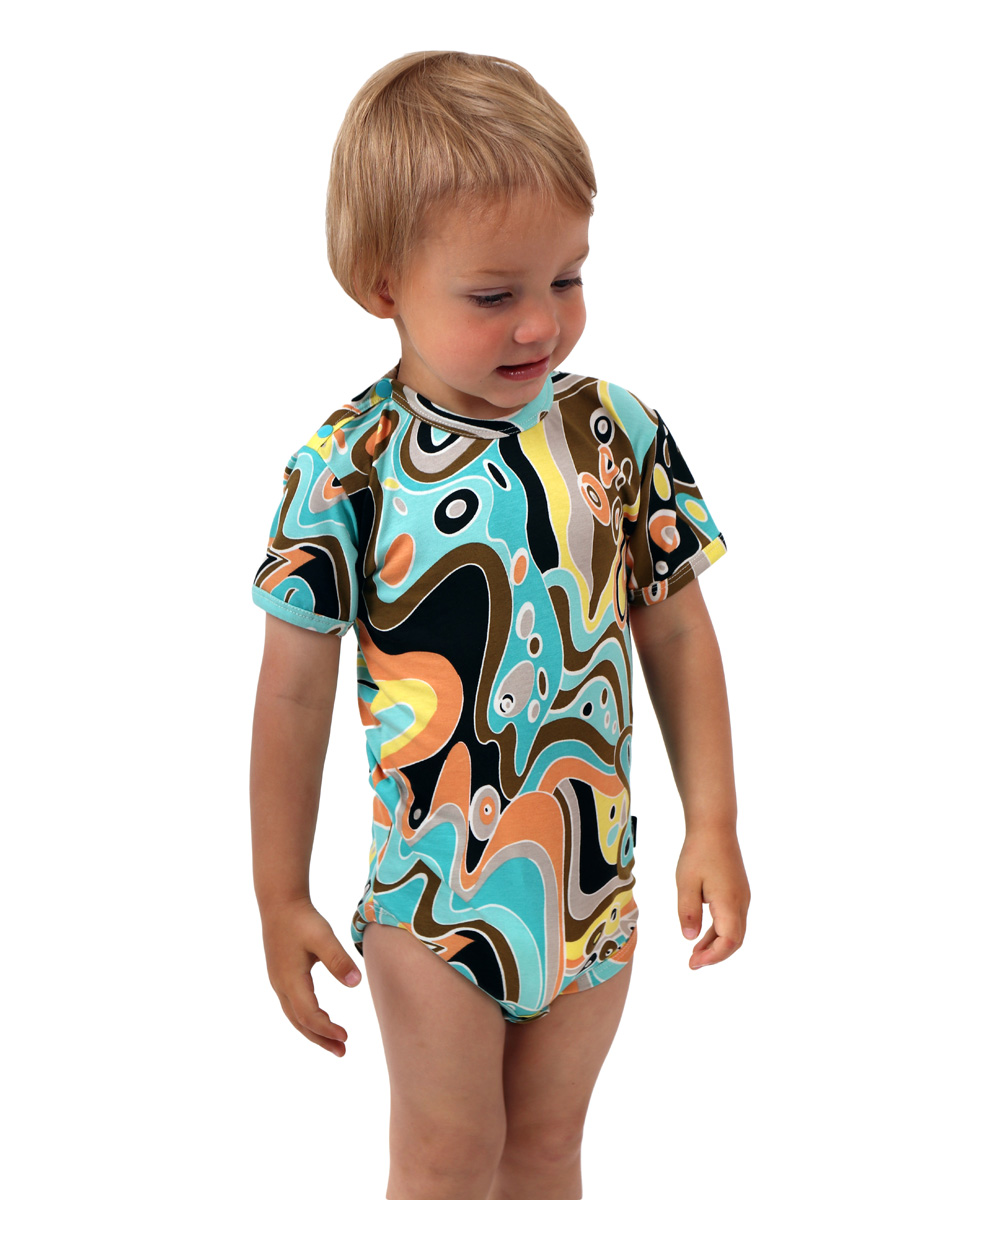 Baby cotton onesies with short sleeves, patterned turquoise